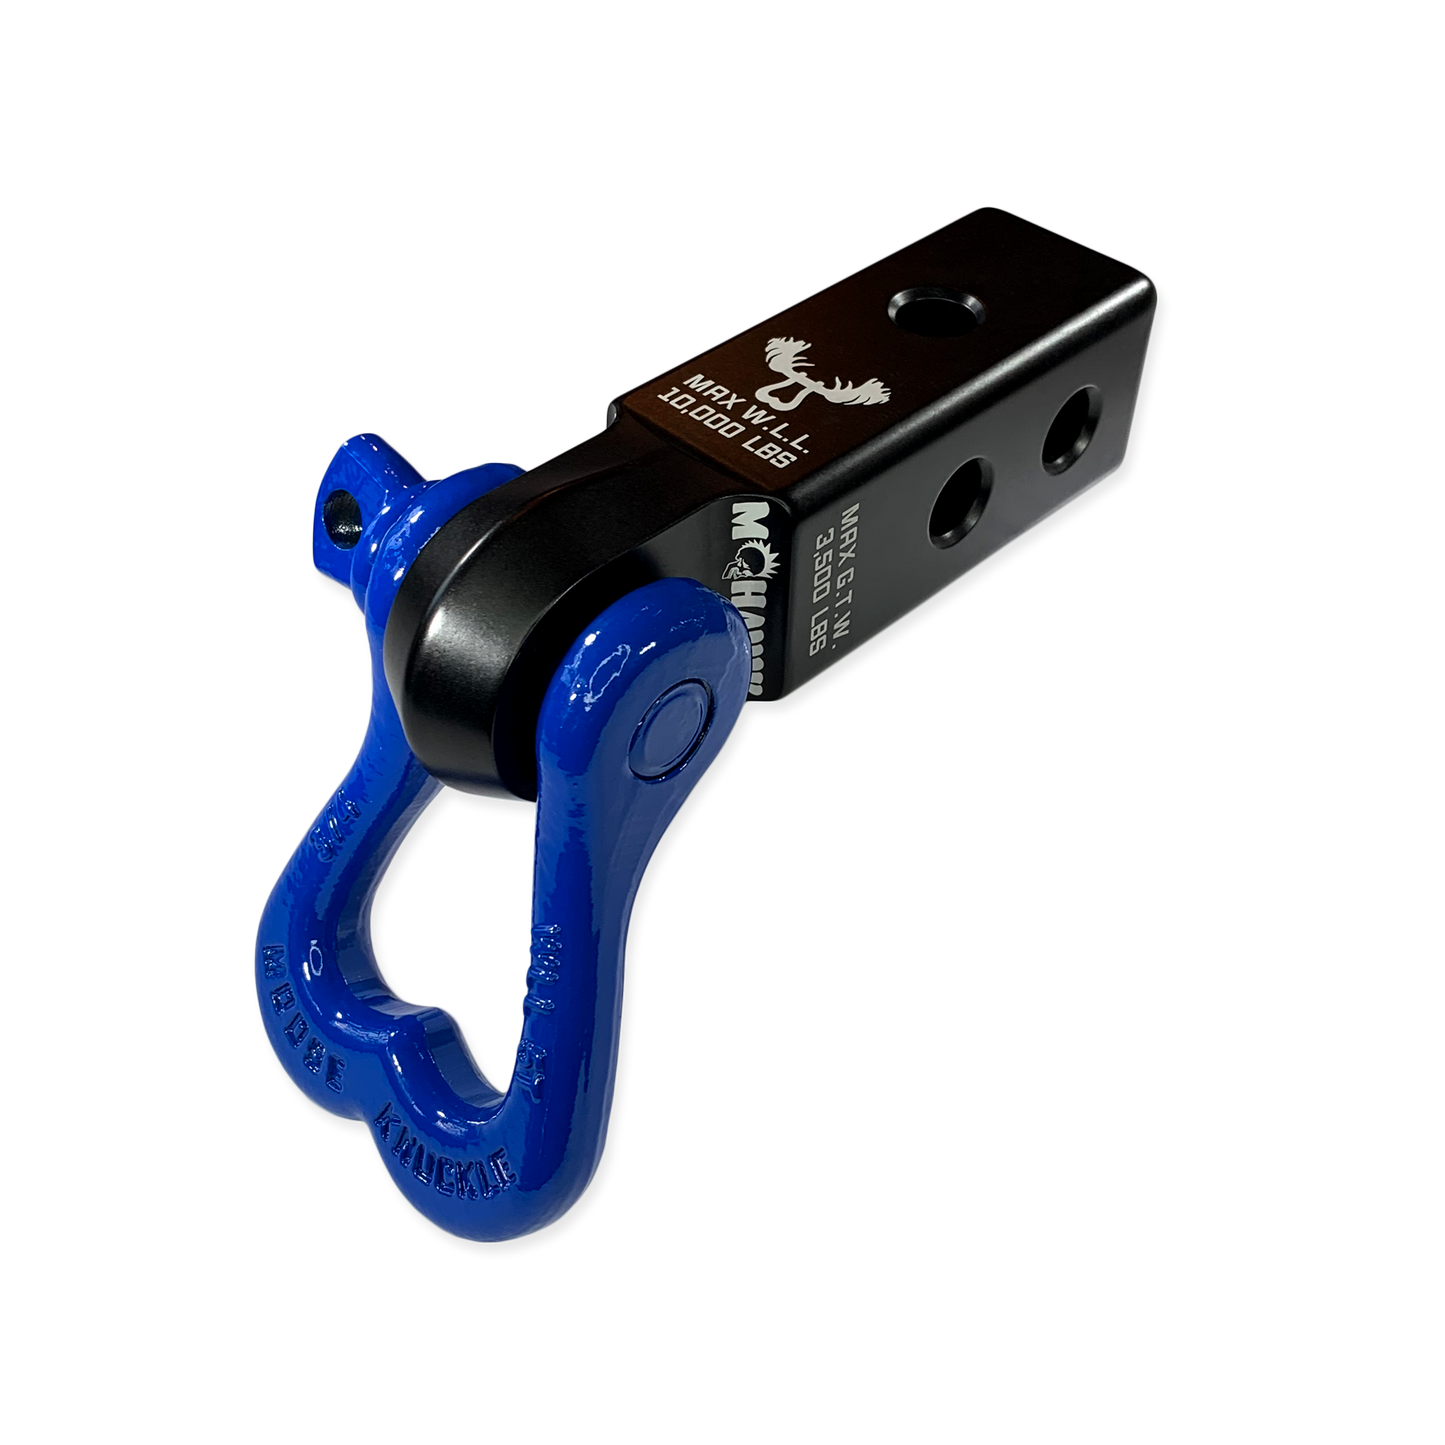 XL Shackle and Mohawk 2.0 Receiver Combo